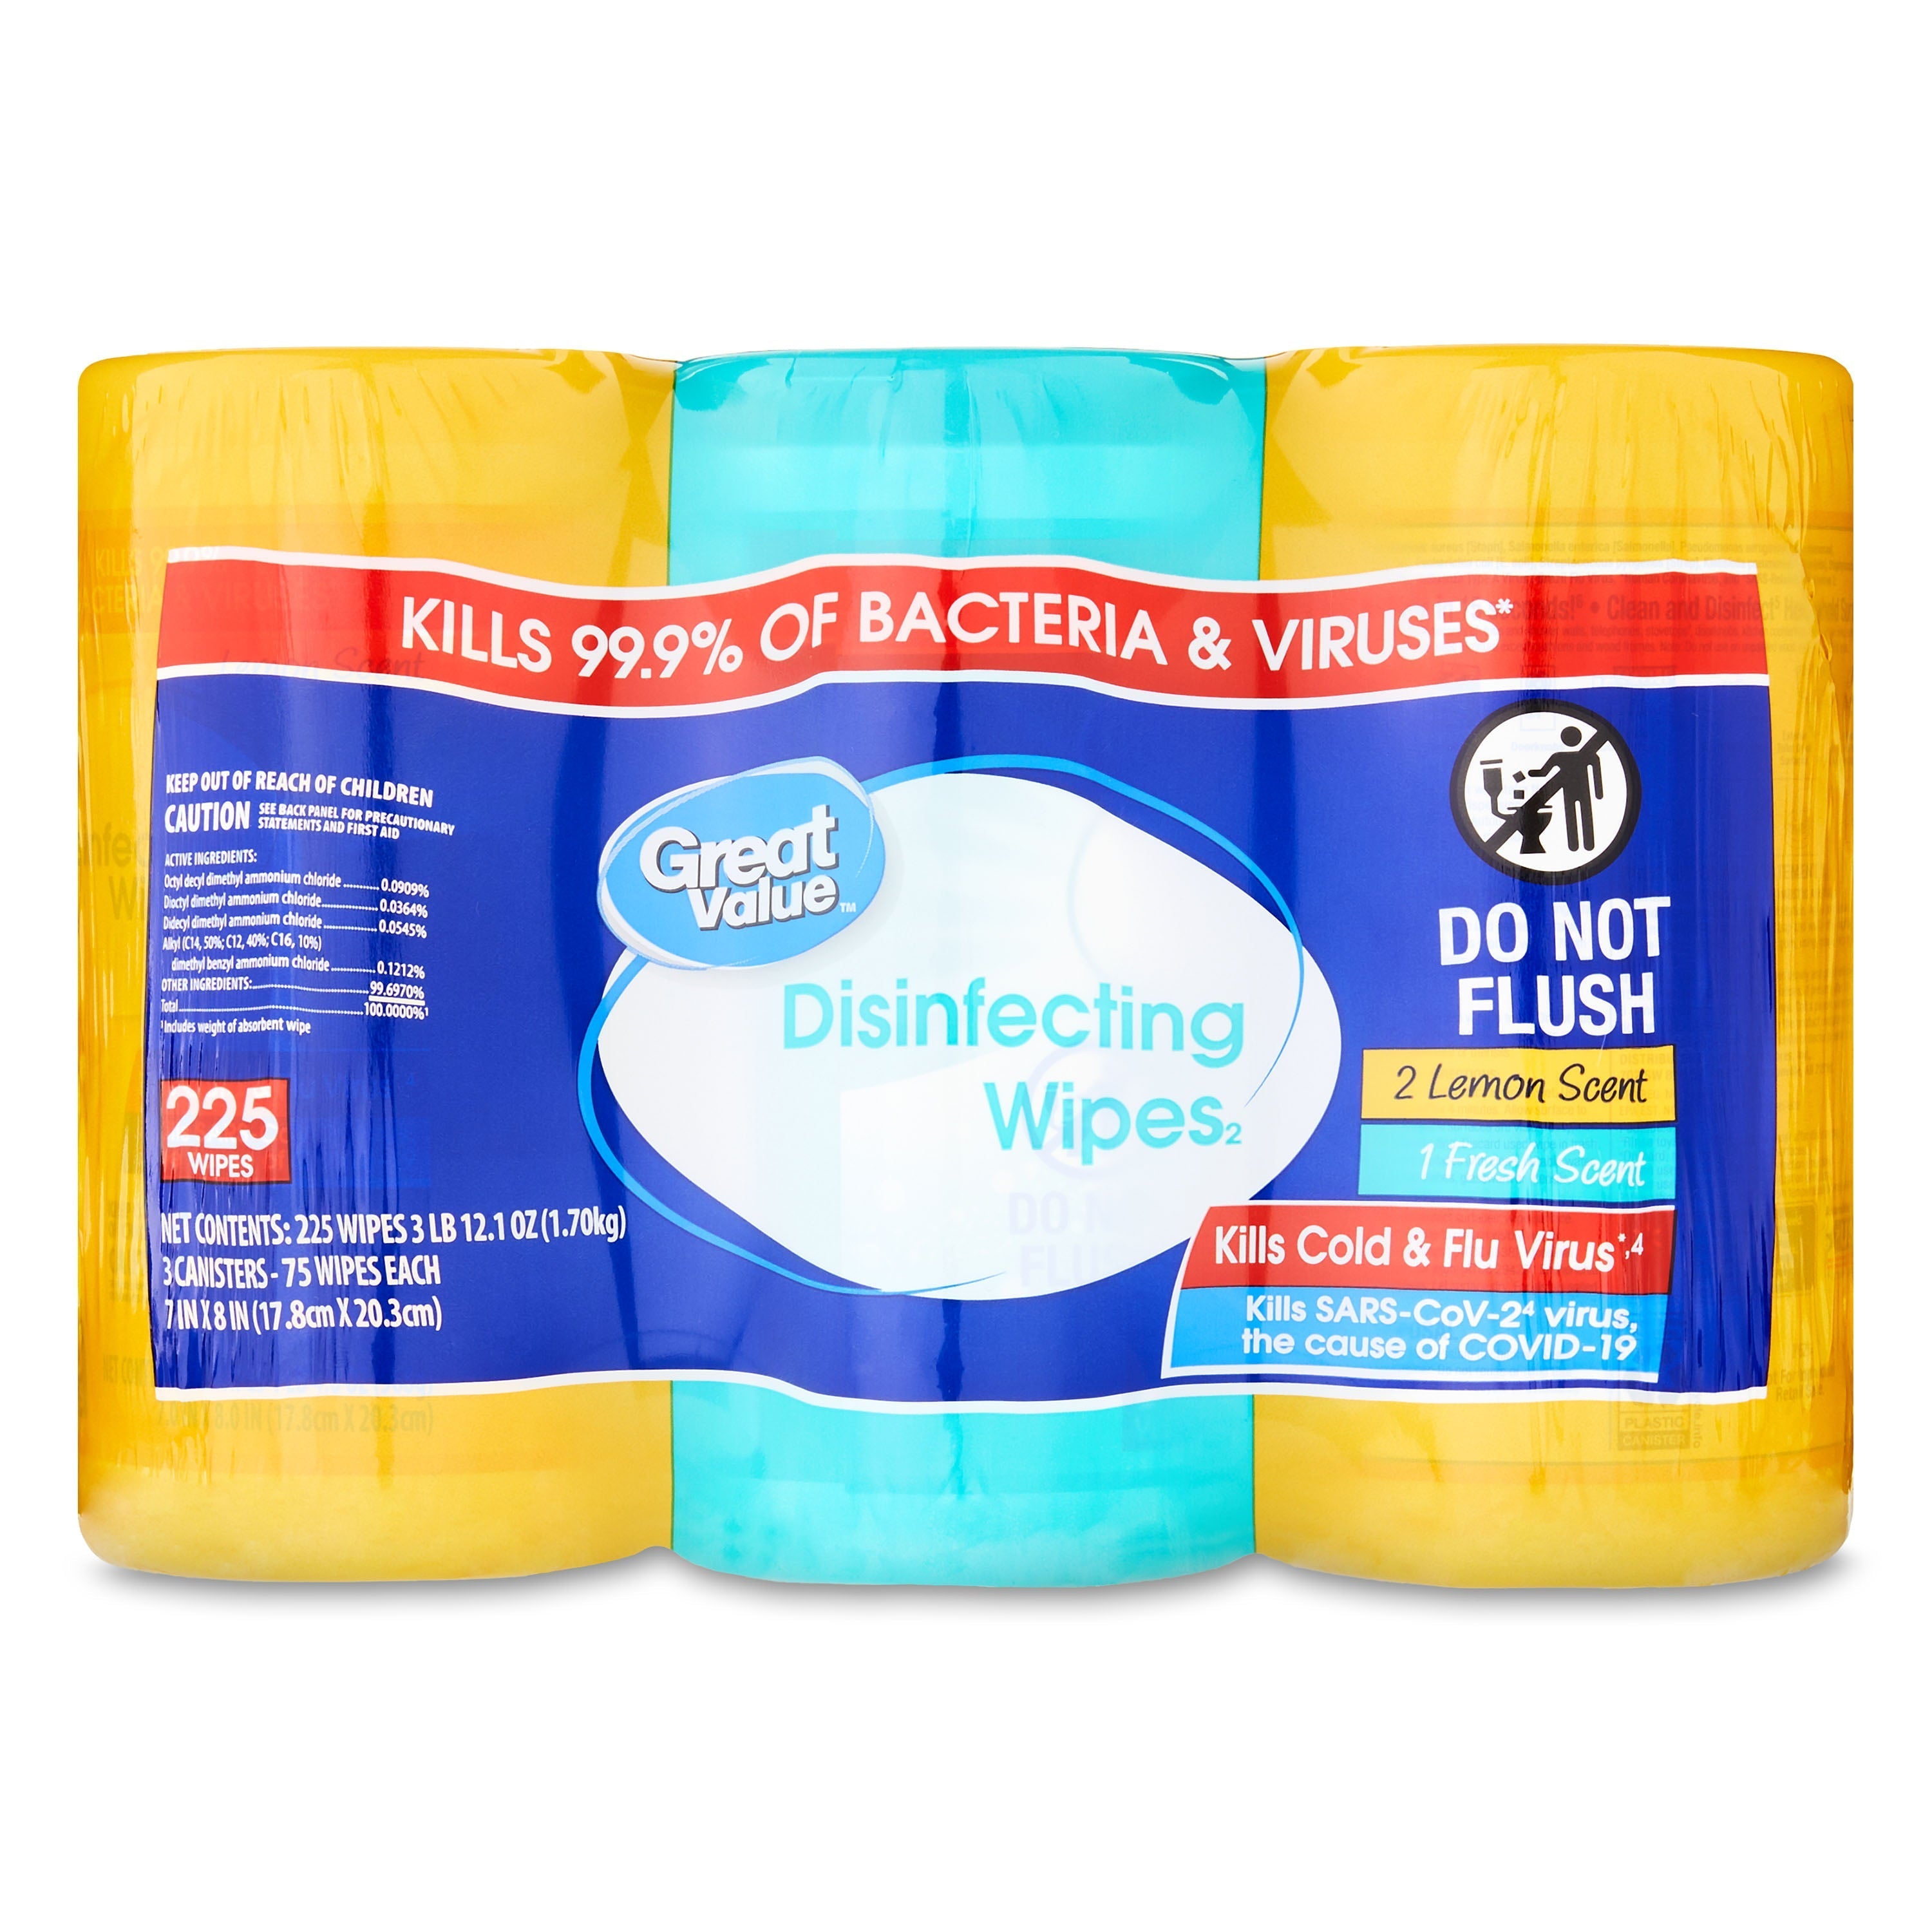 Wholesale prices with free shipping all over United States Great Value Disinfecting Wipes, Fresh and Lemon Scent, 225 Wipes - Steven Deals